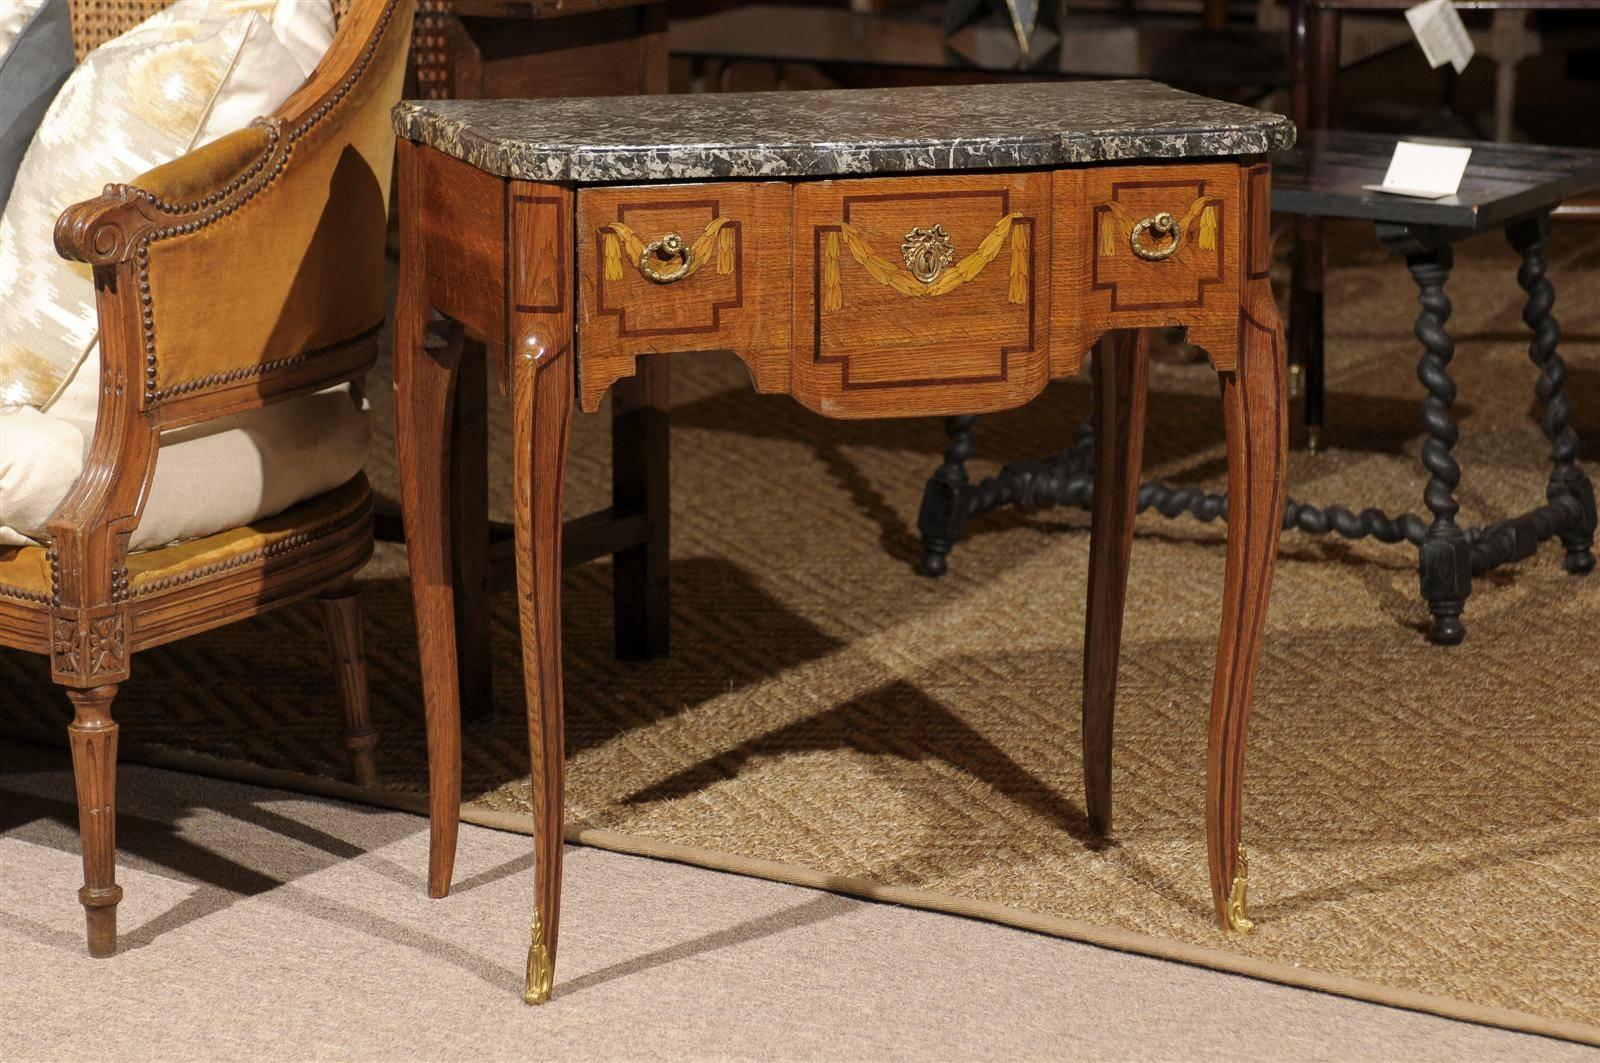 Mid-19th Century Louis XV Inlaid Console with Marble Top, circa 1850
This eyecatching little treasure is perfect for a spot that calls for a small piece with a lot of personality. The inlay is beautiful as are the bronze fittings. The gray and white